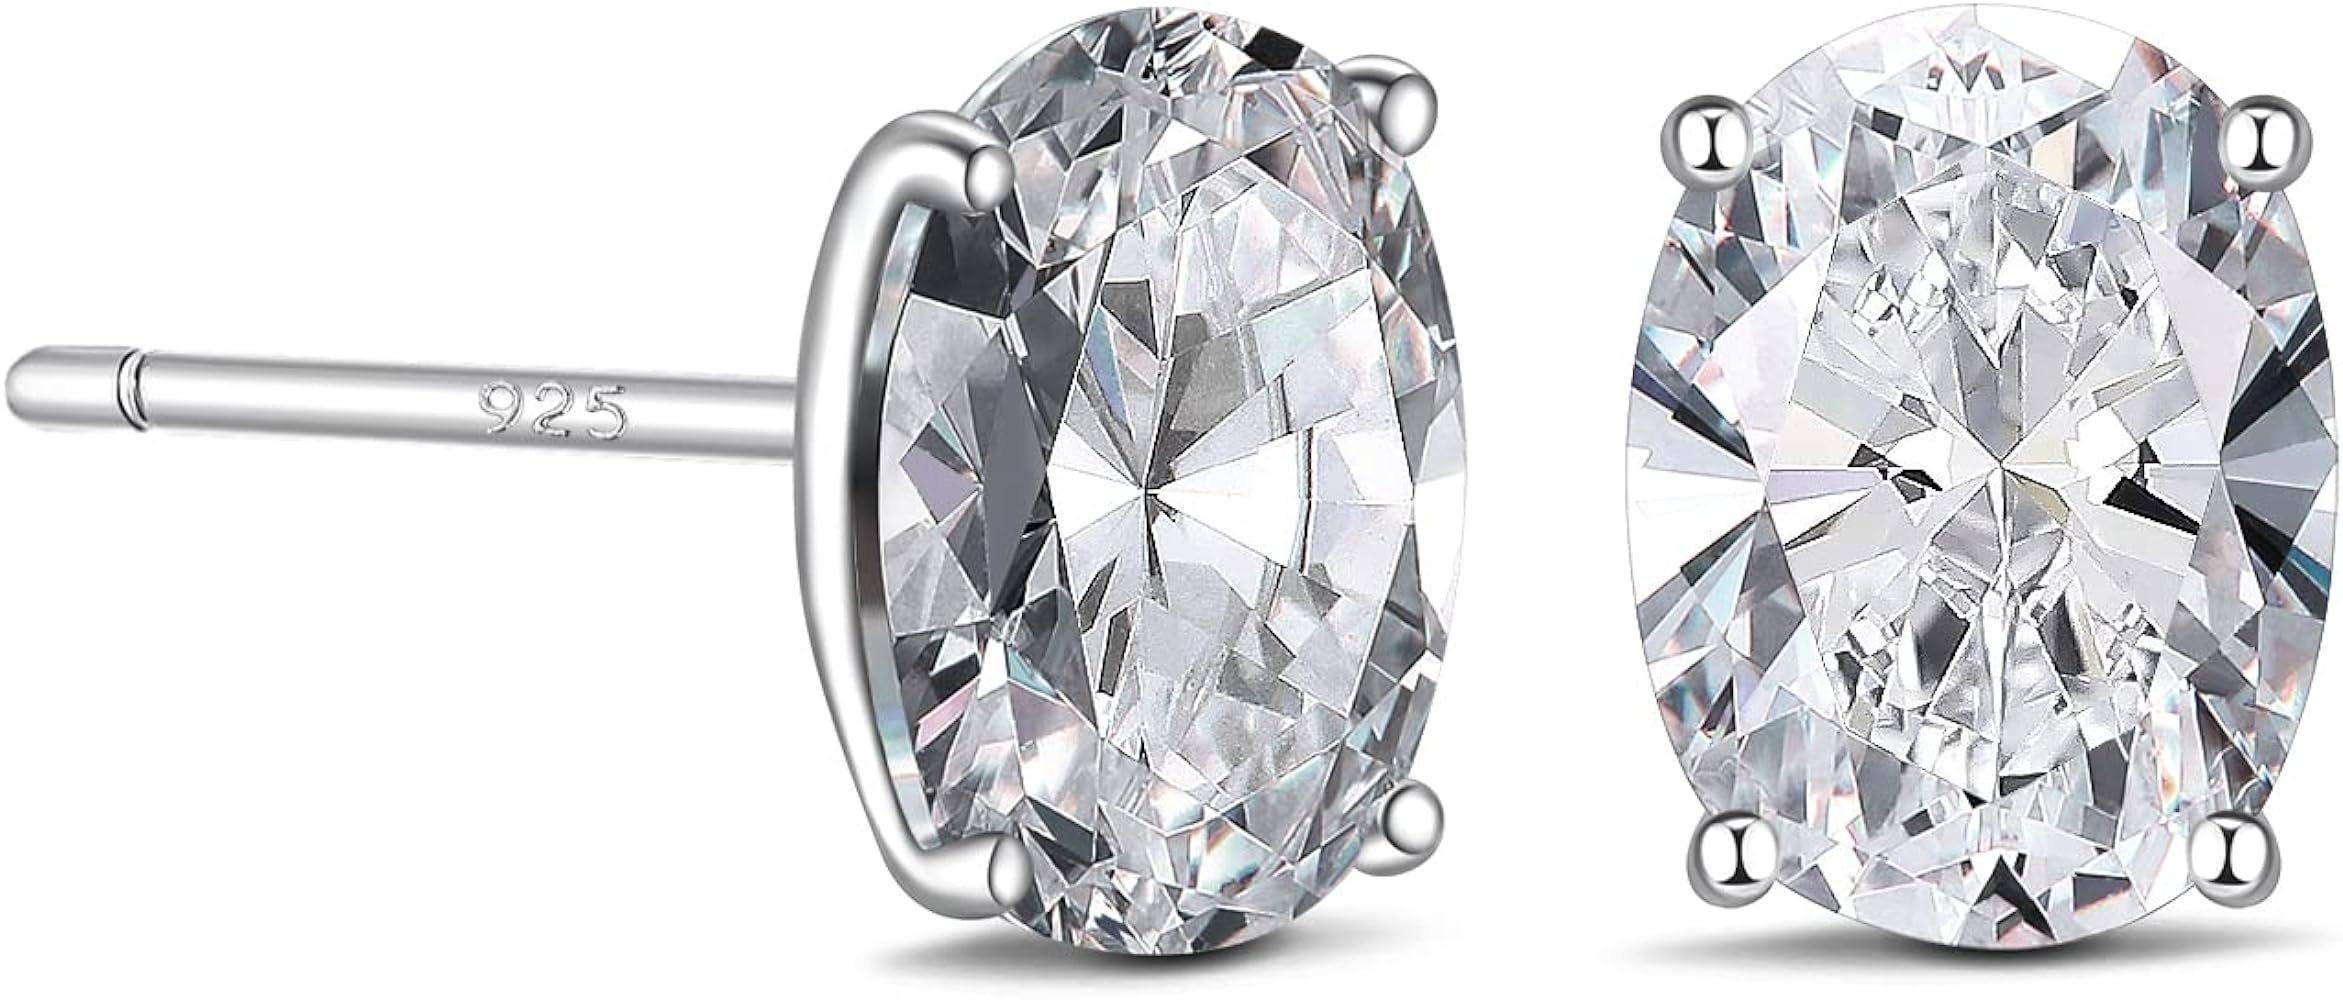 DIAMONLITE 2 Ct Cubic Zirconia Stud Earrings for Women and Men, D Color VVS Clarity Excellent Cut, 18K Yellow Gold or Rhodium Plated 925 Sterling Silver Lab Created Simulated Diamond Earrings for Women and Men - Mens and Womens Silver CZ Studs | Amazon (US)